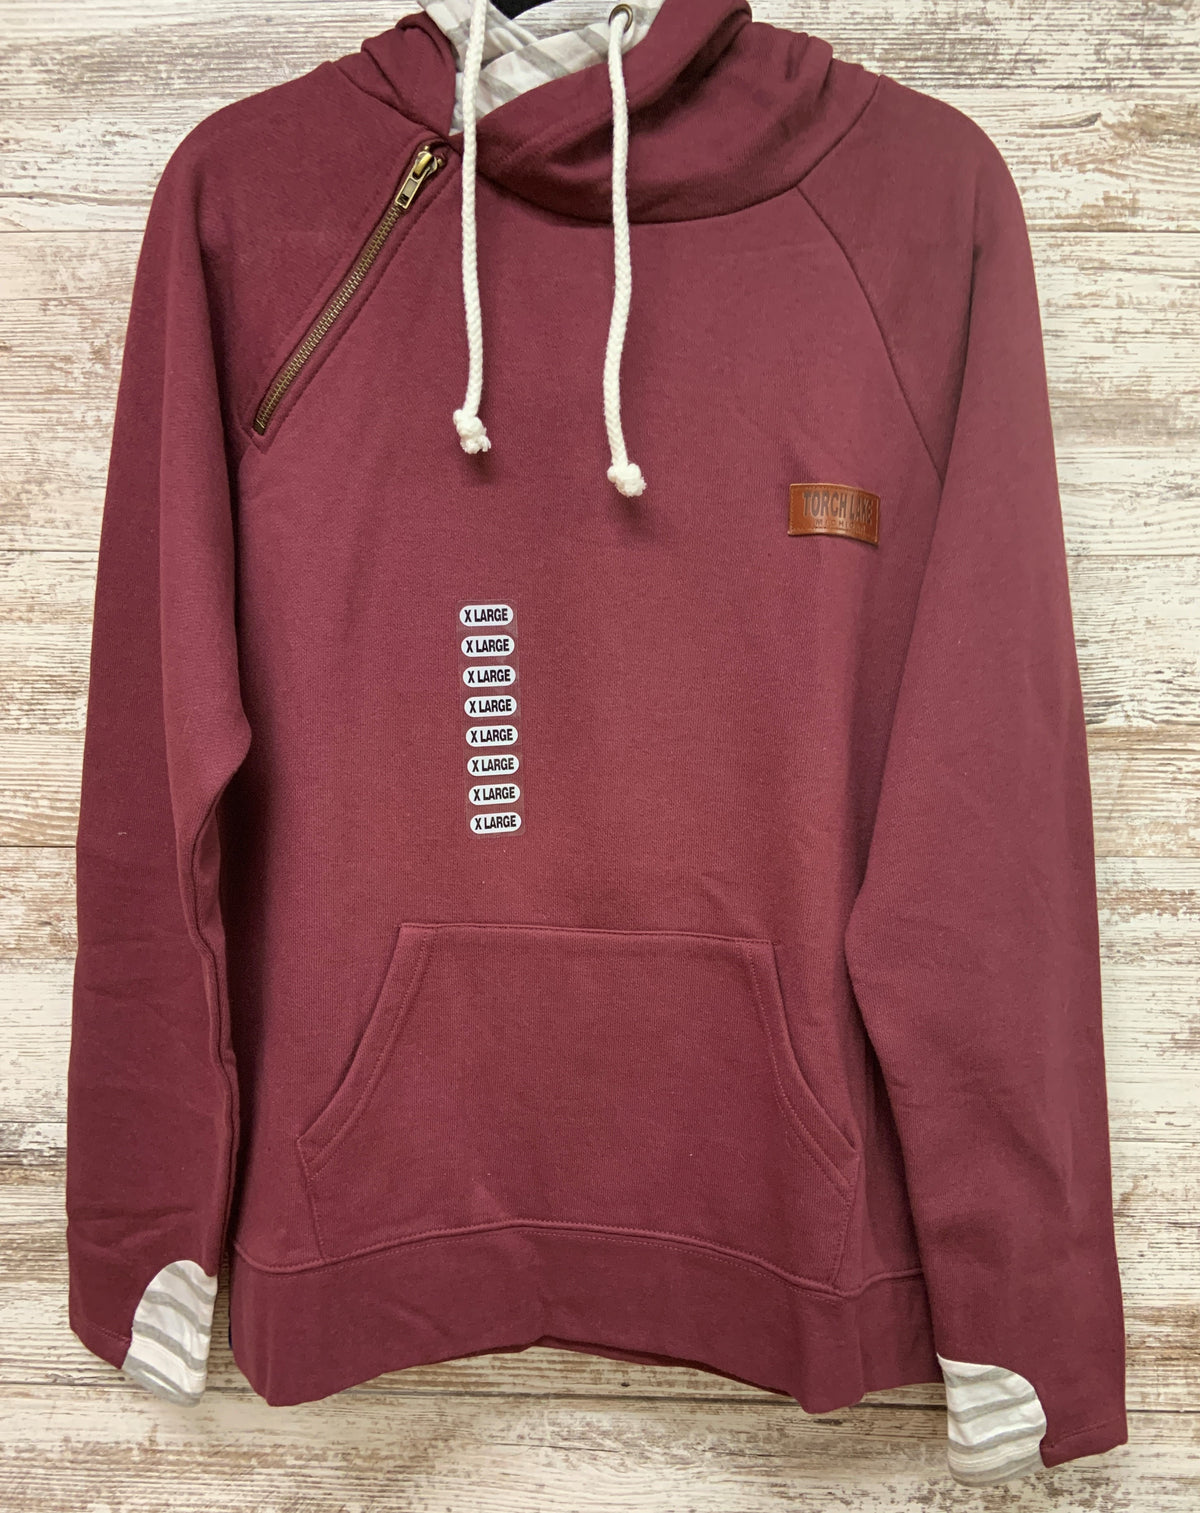 Stripes, Zippers &amp; Patches Oh My! Hoodie